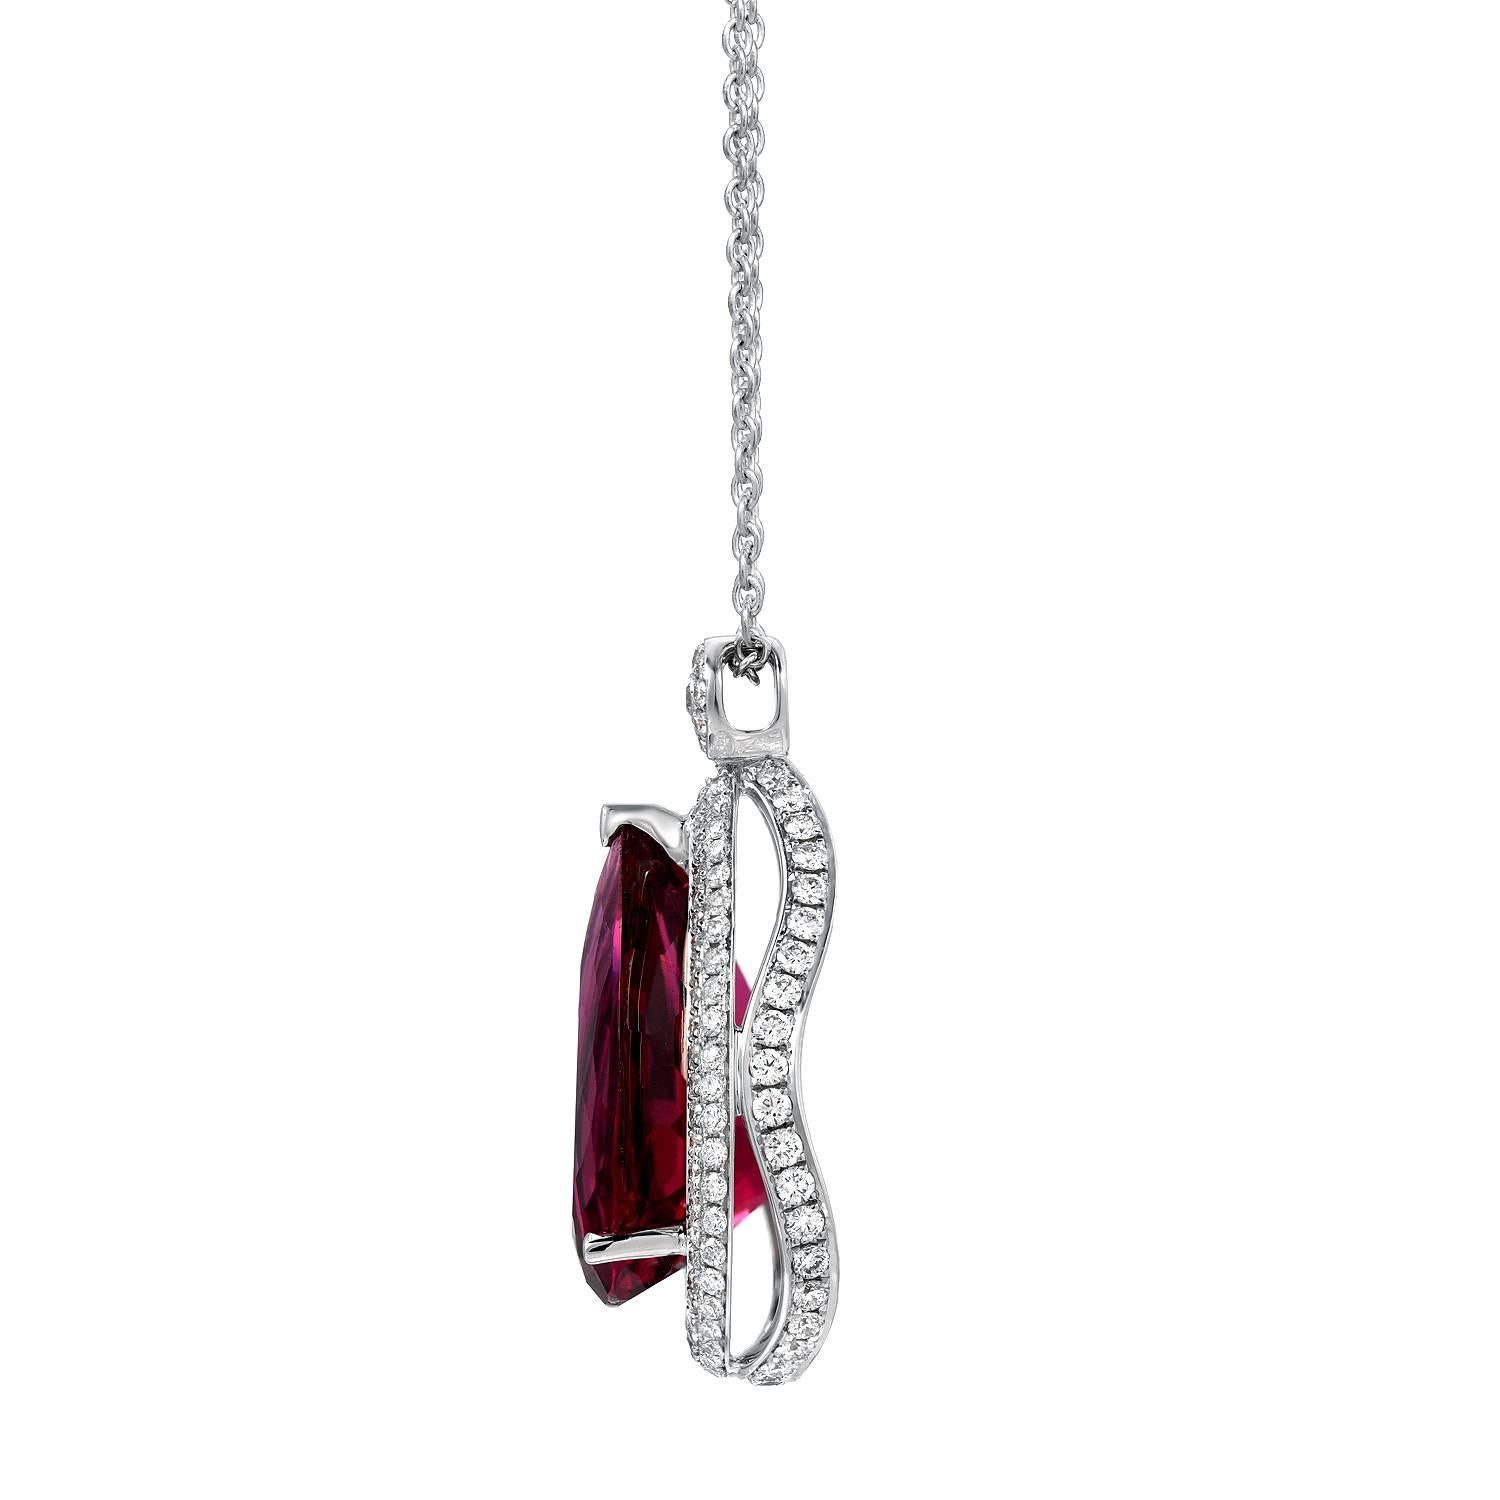 Superb 12.12ct pear shaped Rubellite Tourmaline and 1.26ct total round brilliant diamonds, adorn this striking 18K white gold pendant necklace.
Total chain length: 17 inches. Chain length can be adjusted upon request.